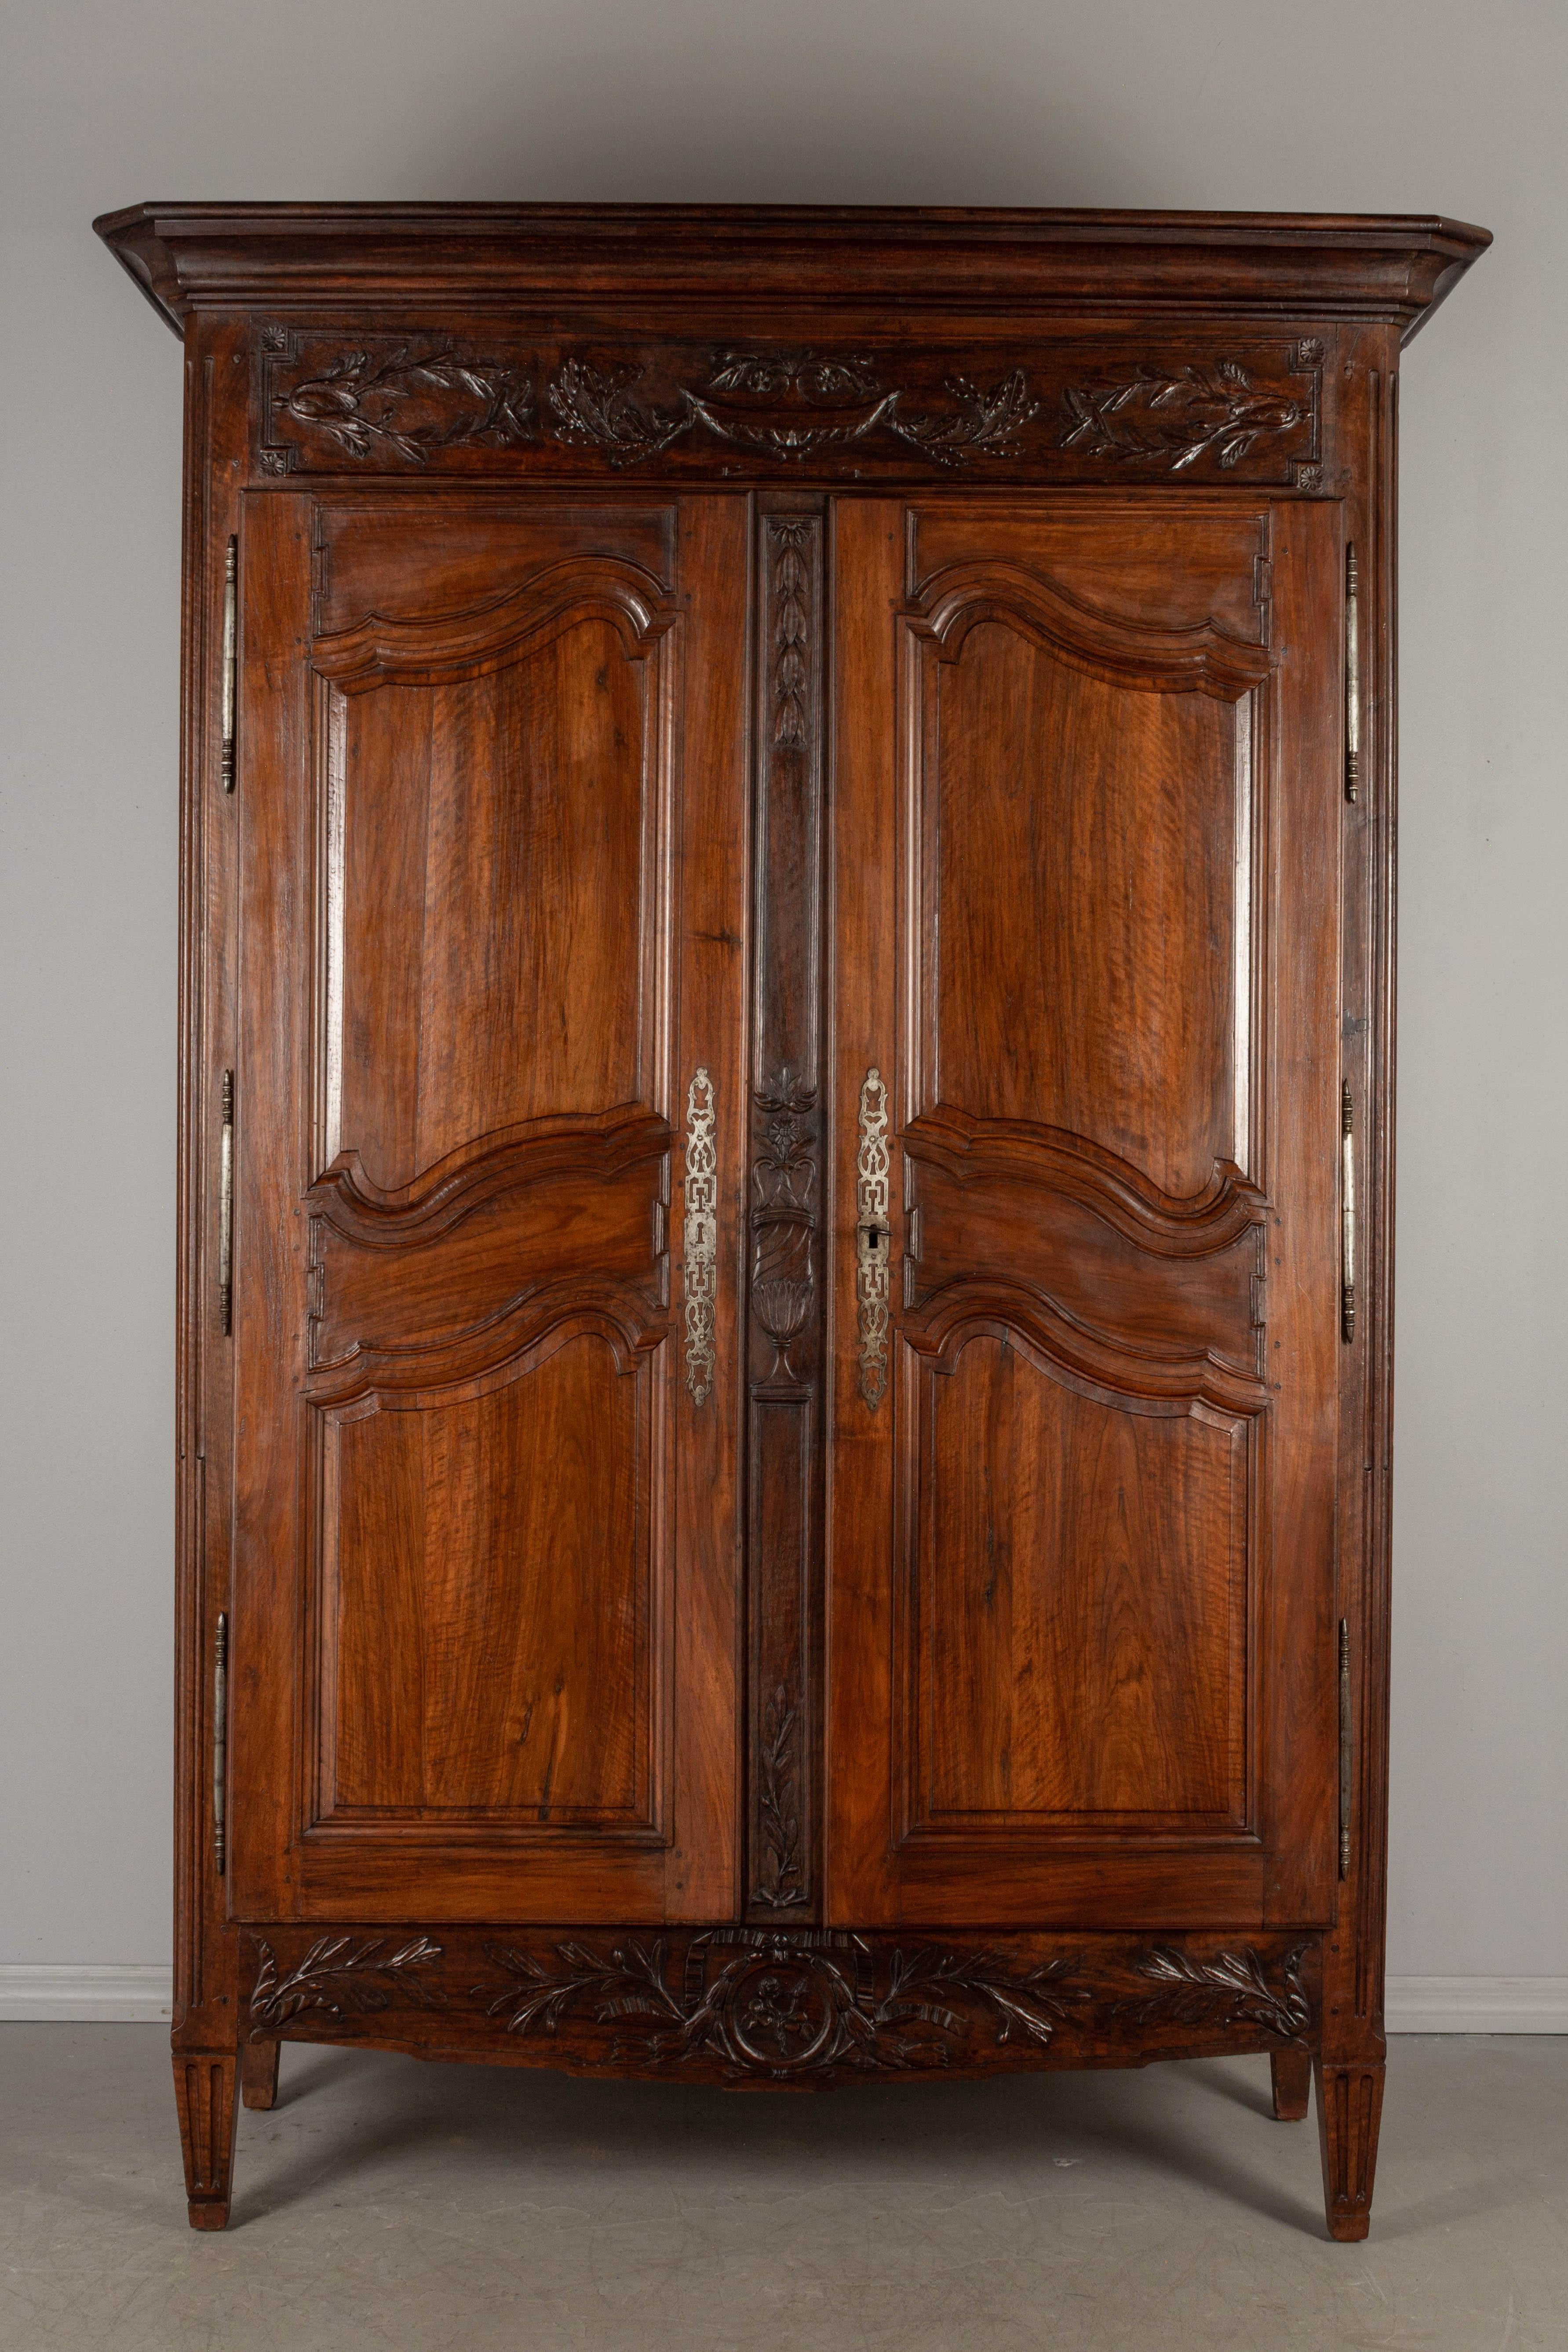 Hand-Carved 19th Century Louis XVI Style French Armoire or Wardrobe